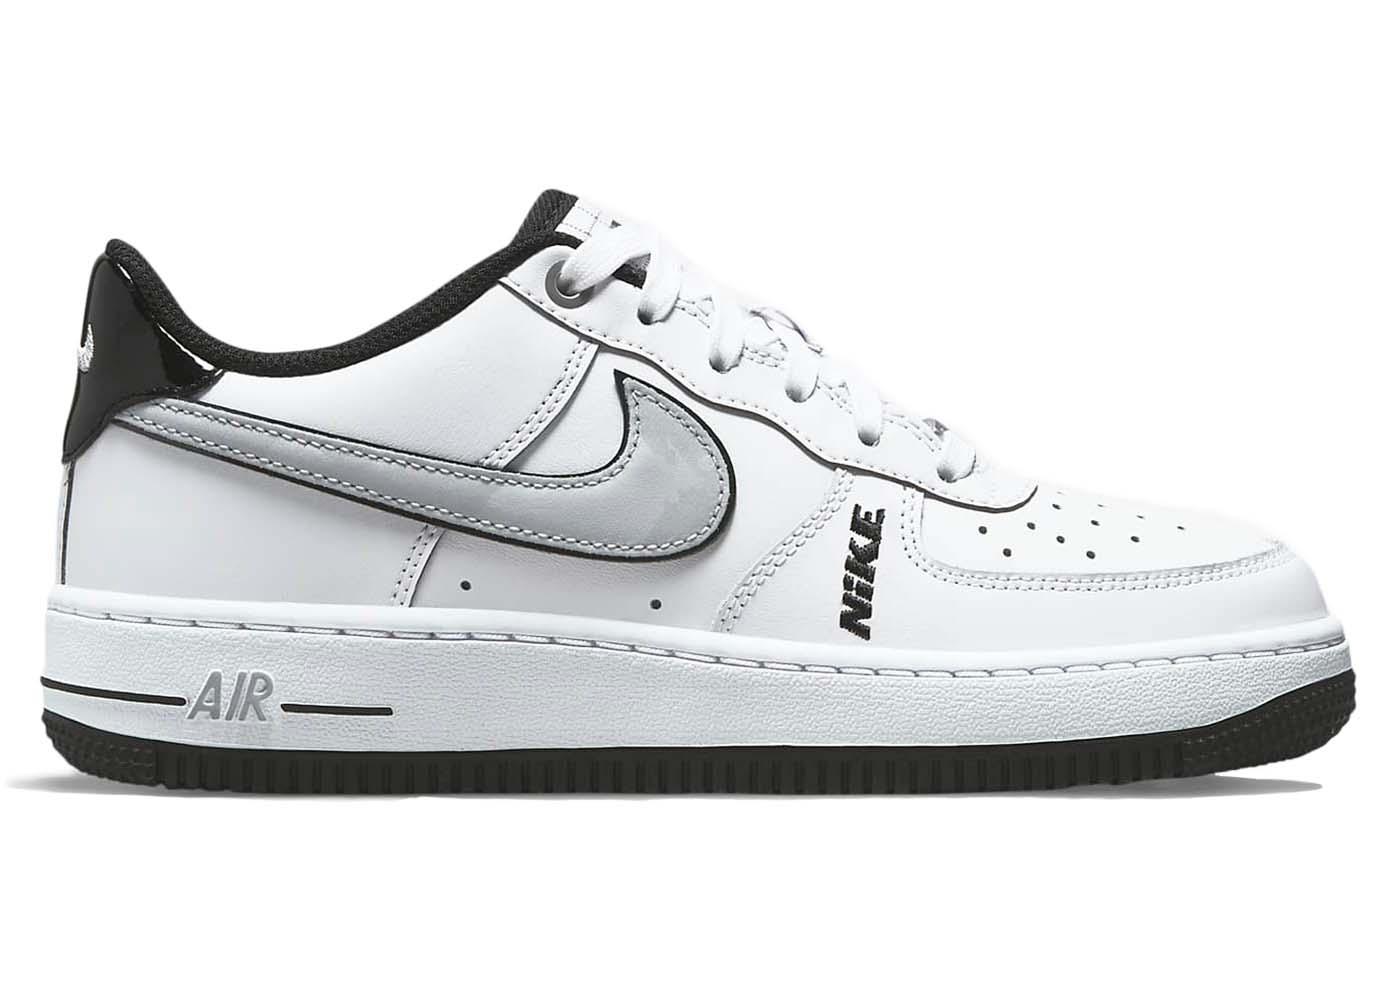 Nike Air Force 1 Low LV8 White Wolf Grey Black (GS) Kids' - DO3809